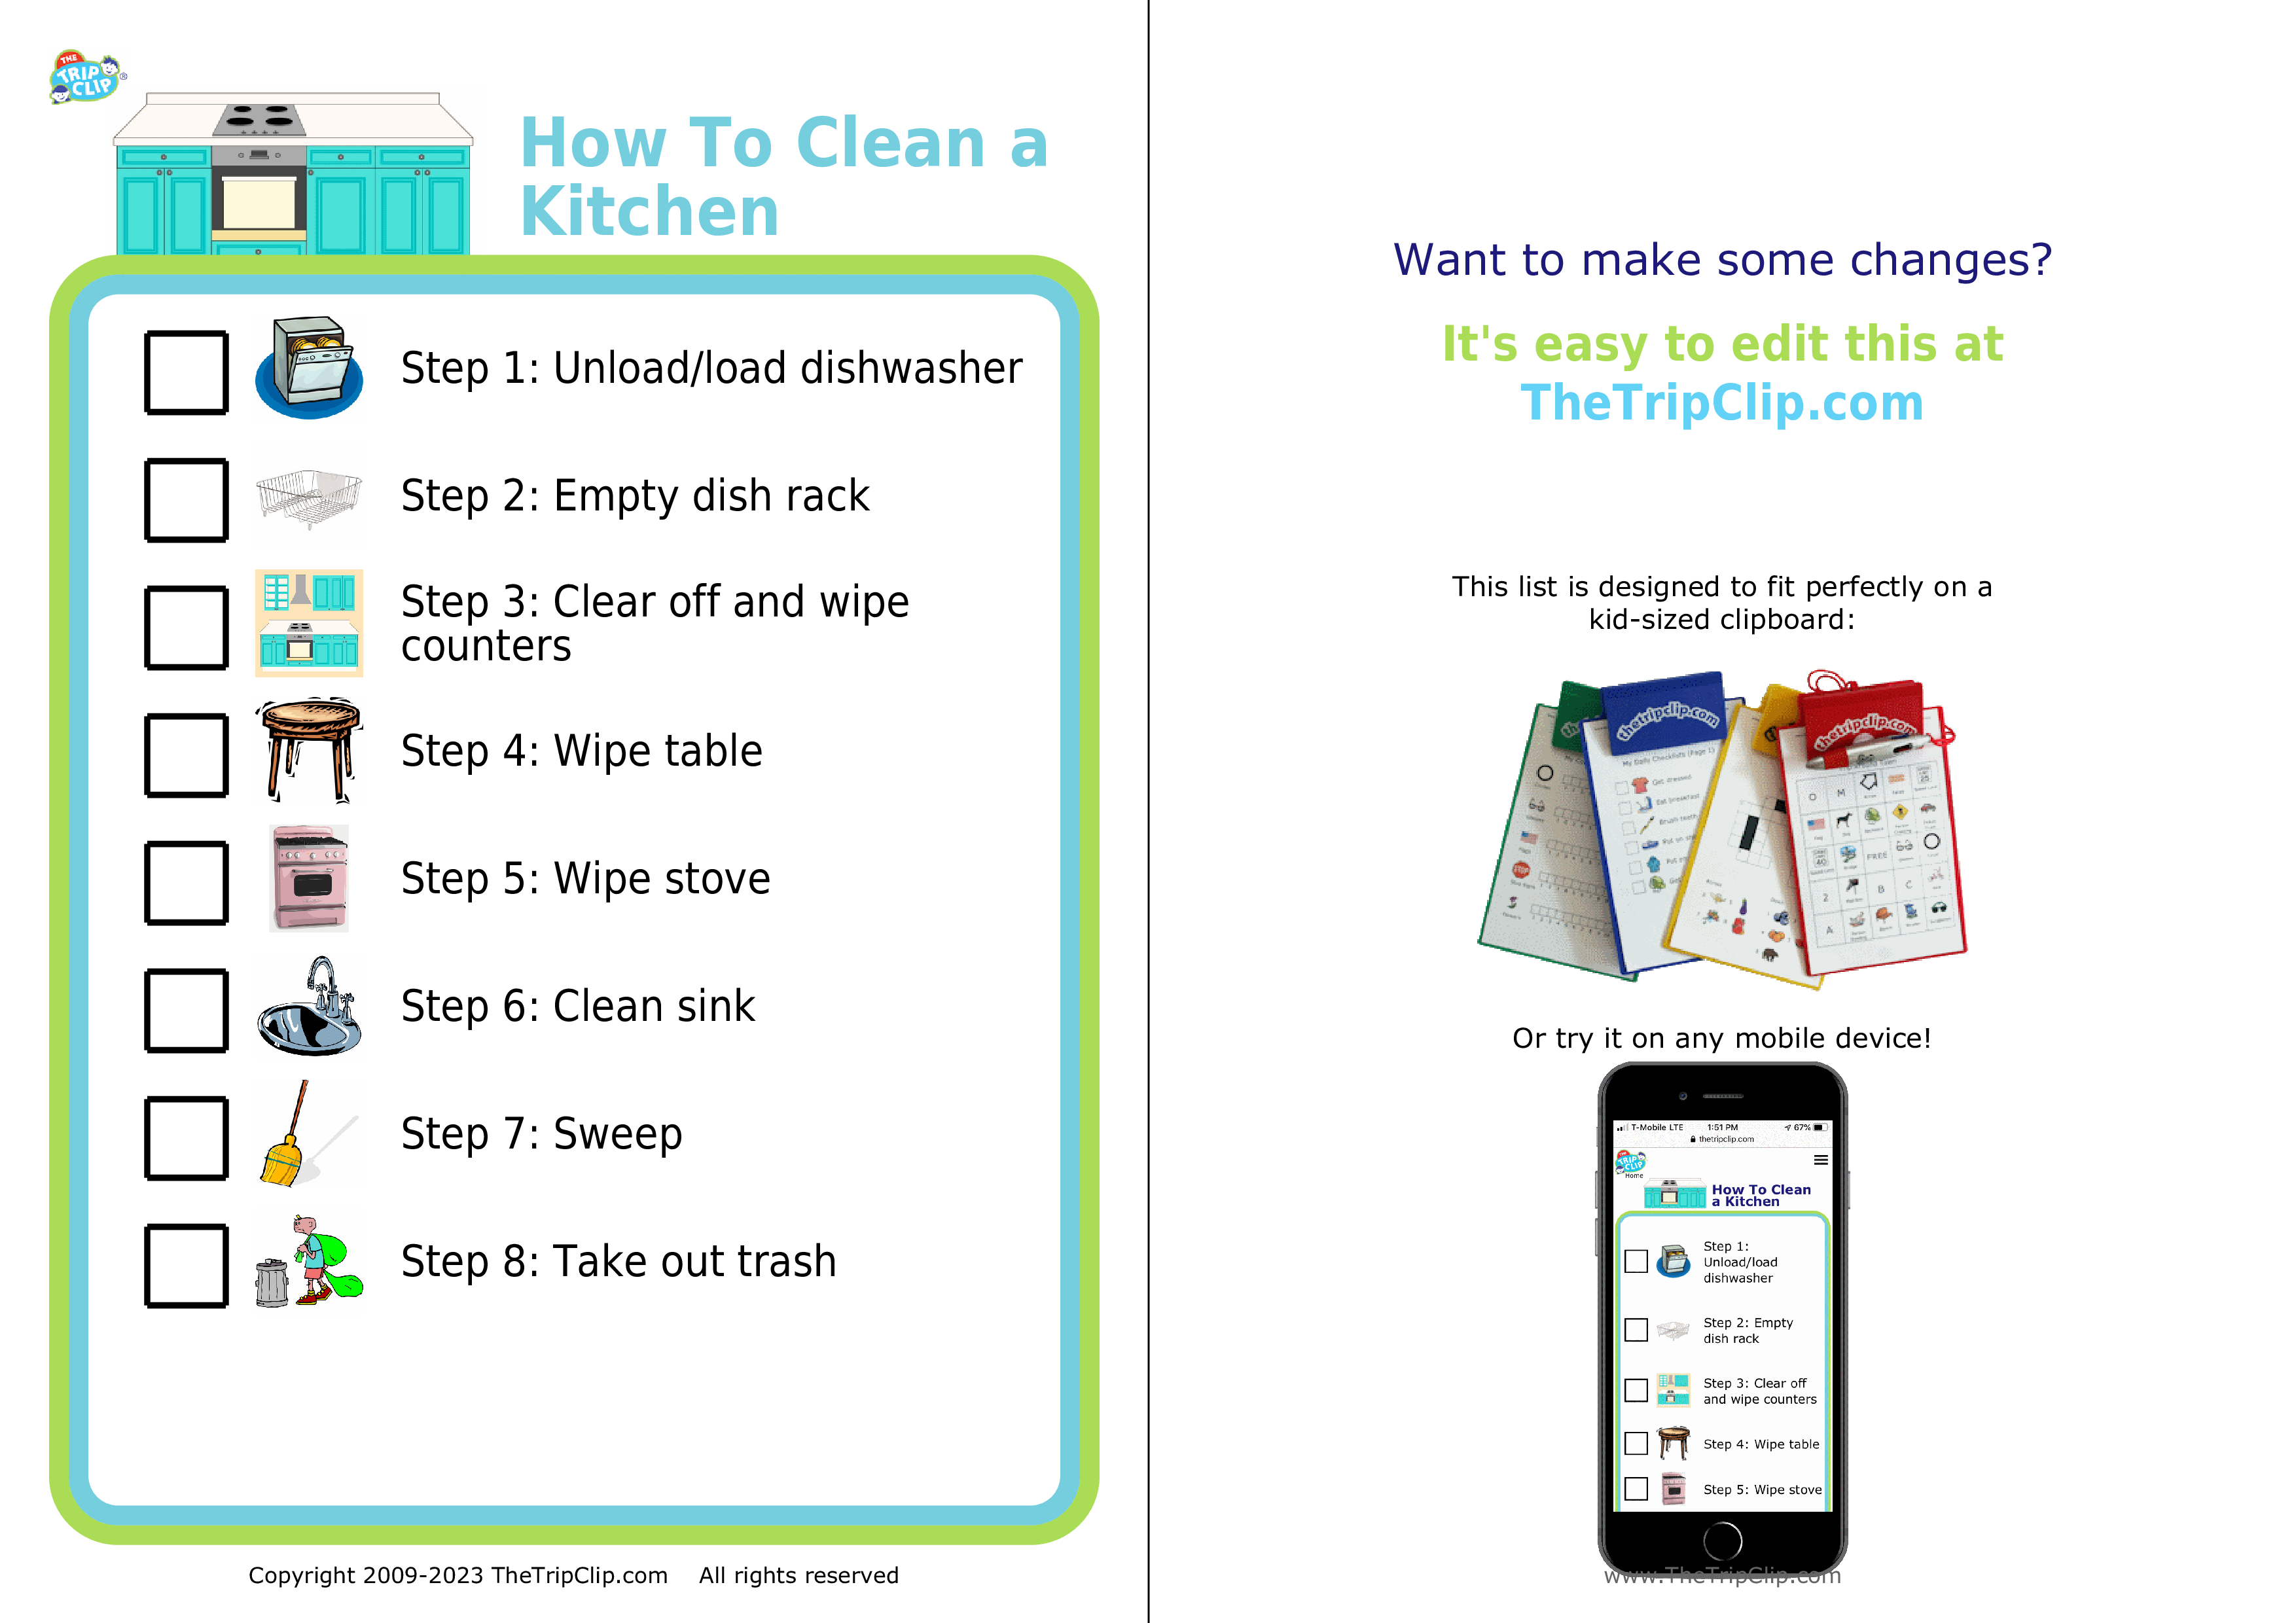 Picture checklists to teach a kid to clean a kitchen in 8 steps